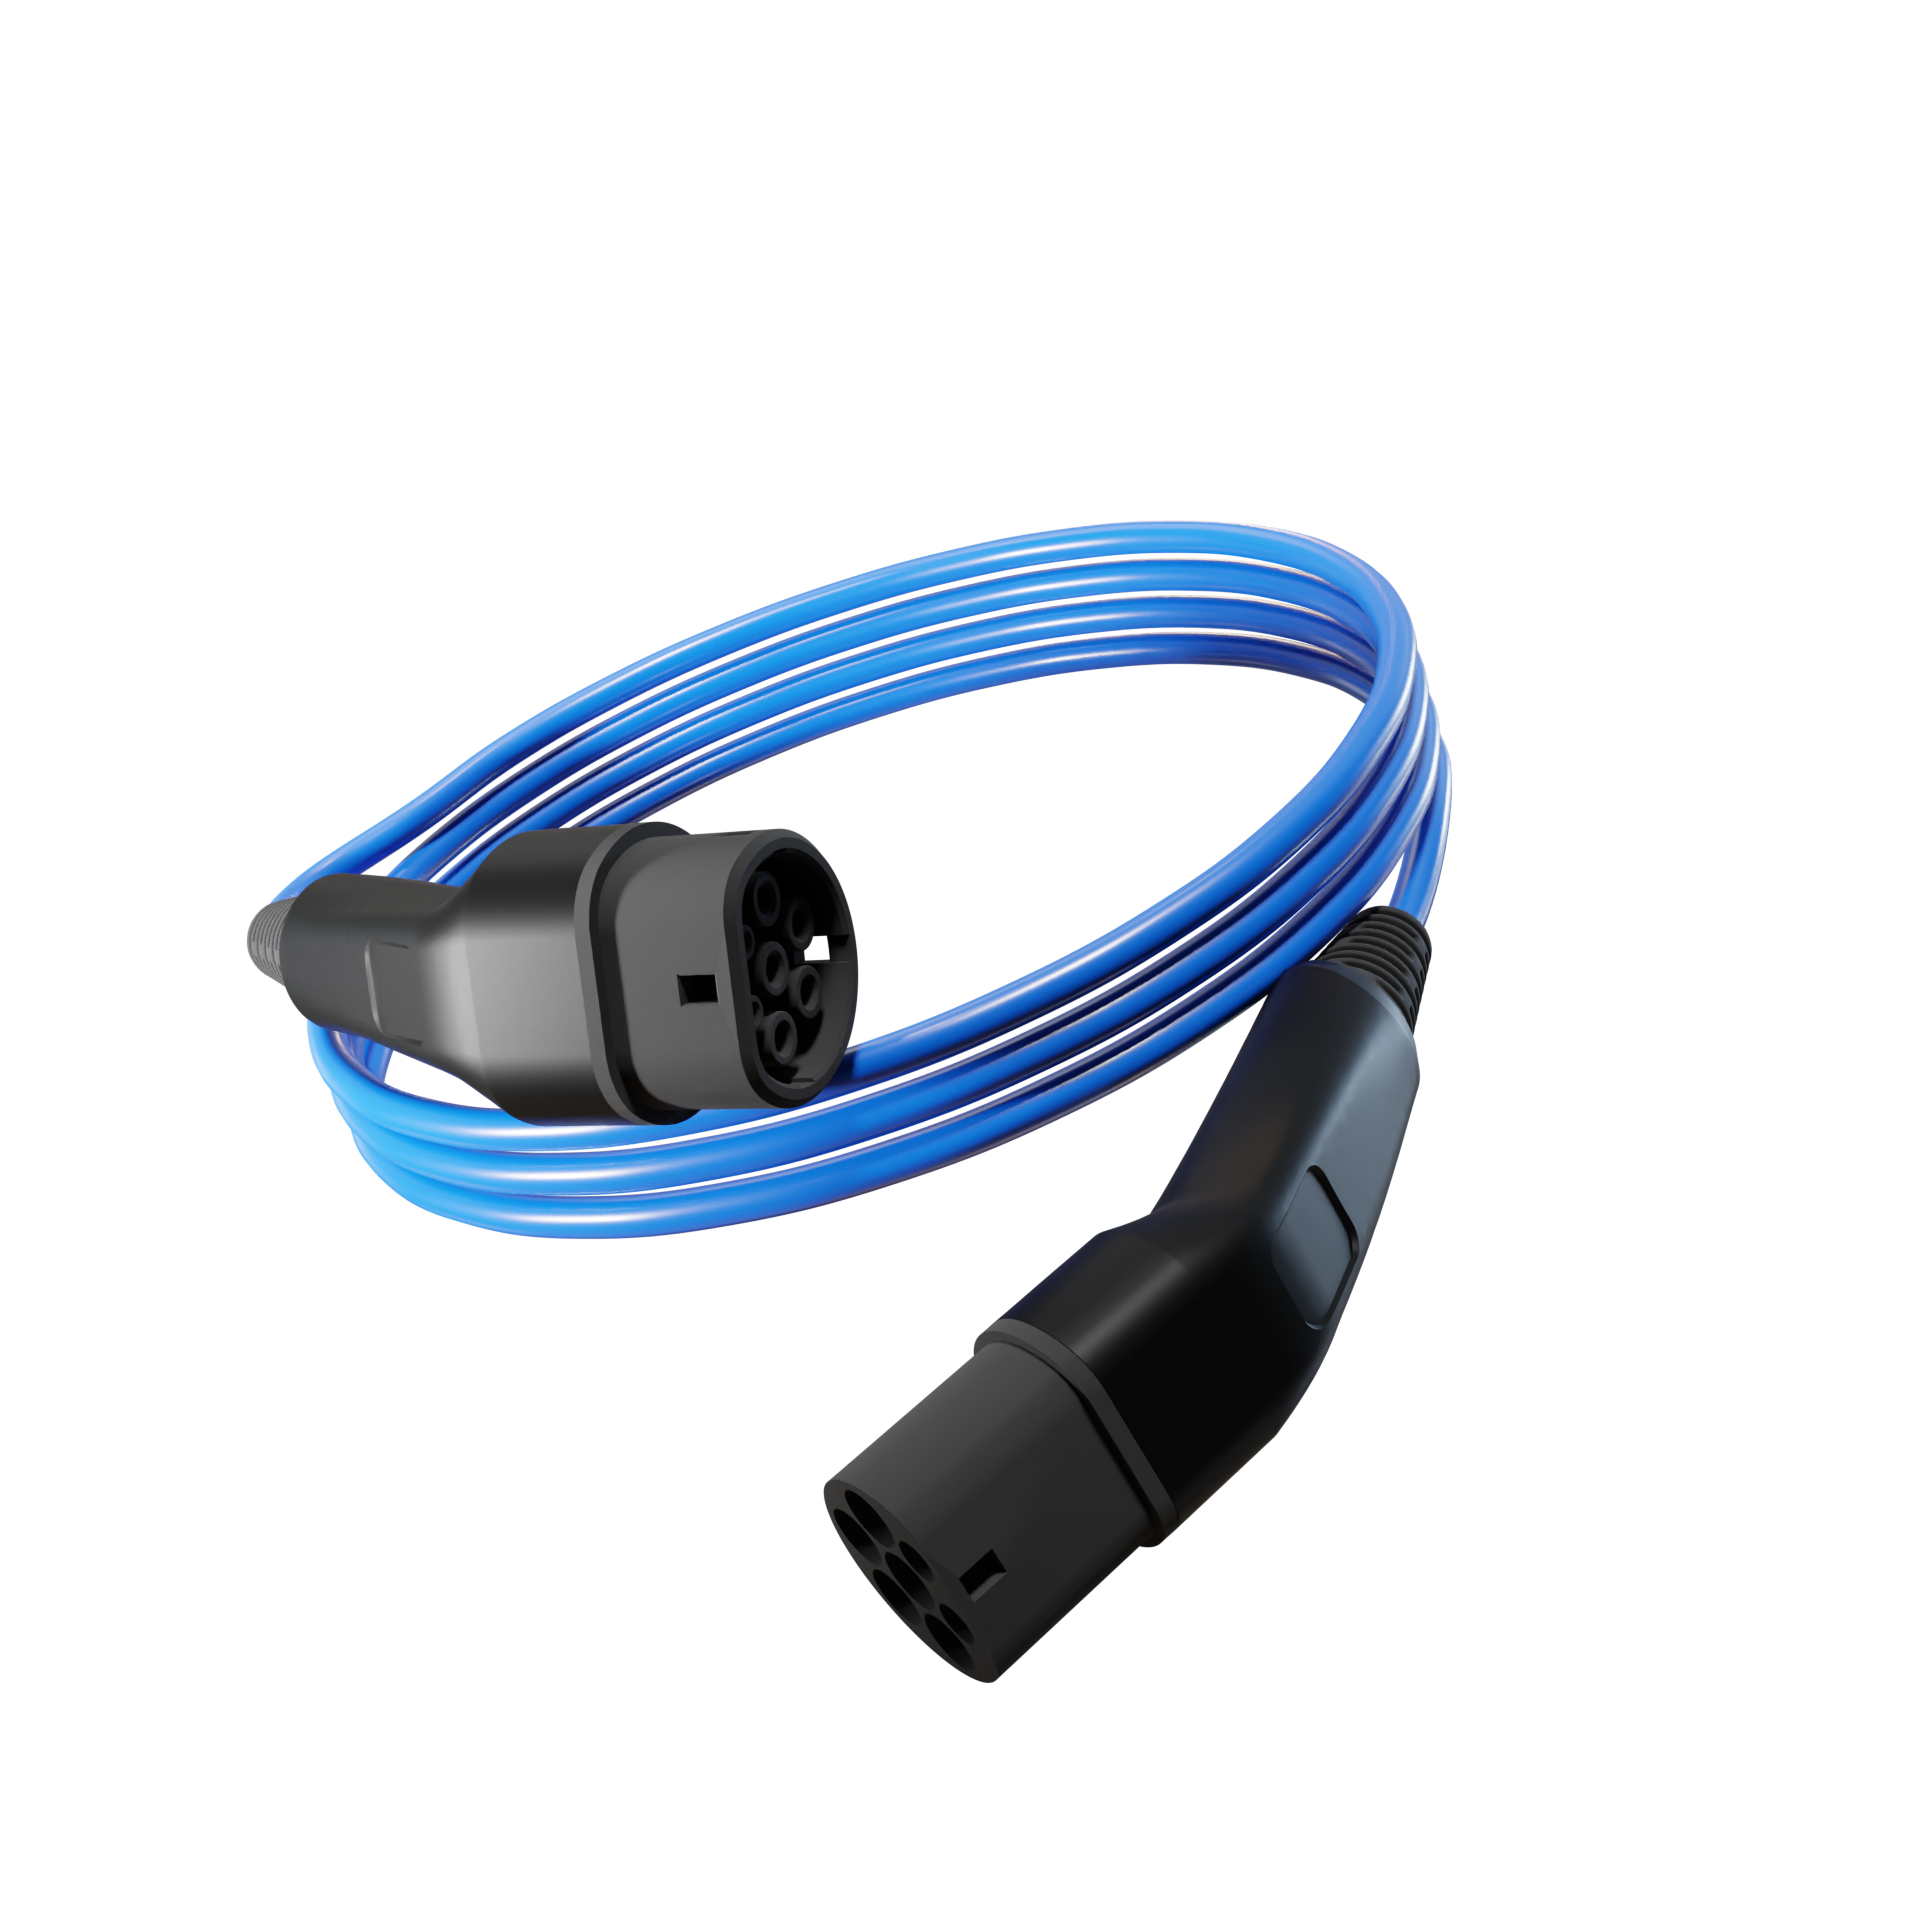 Type 2 EV Cable, 2 Year Warranty, EVSE